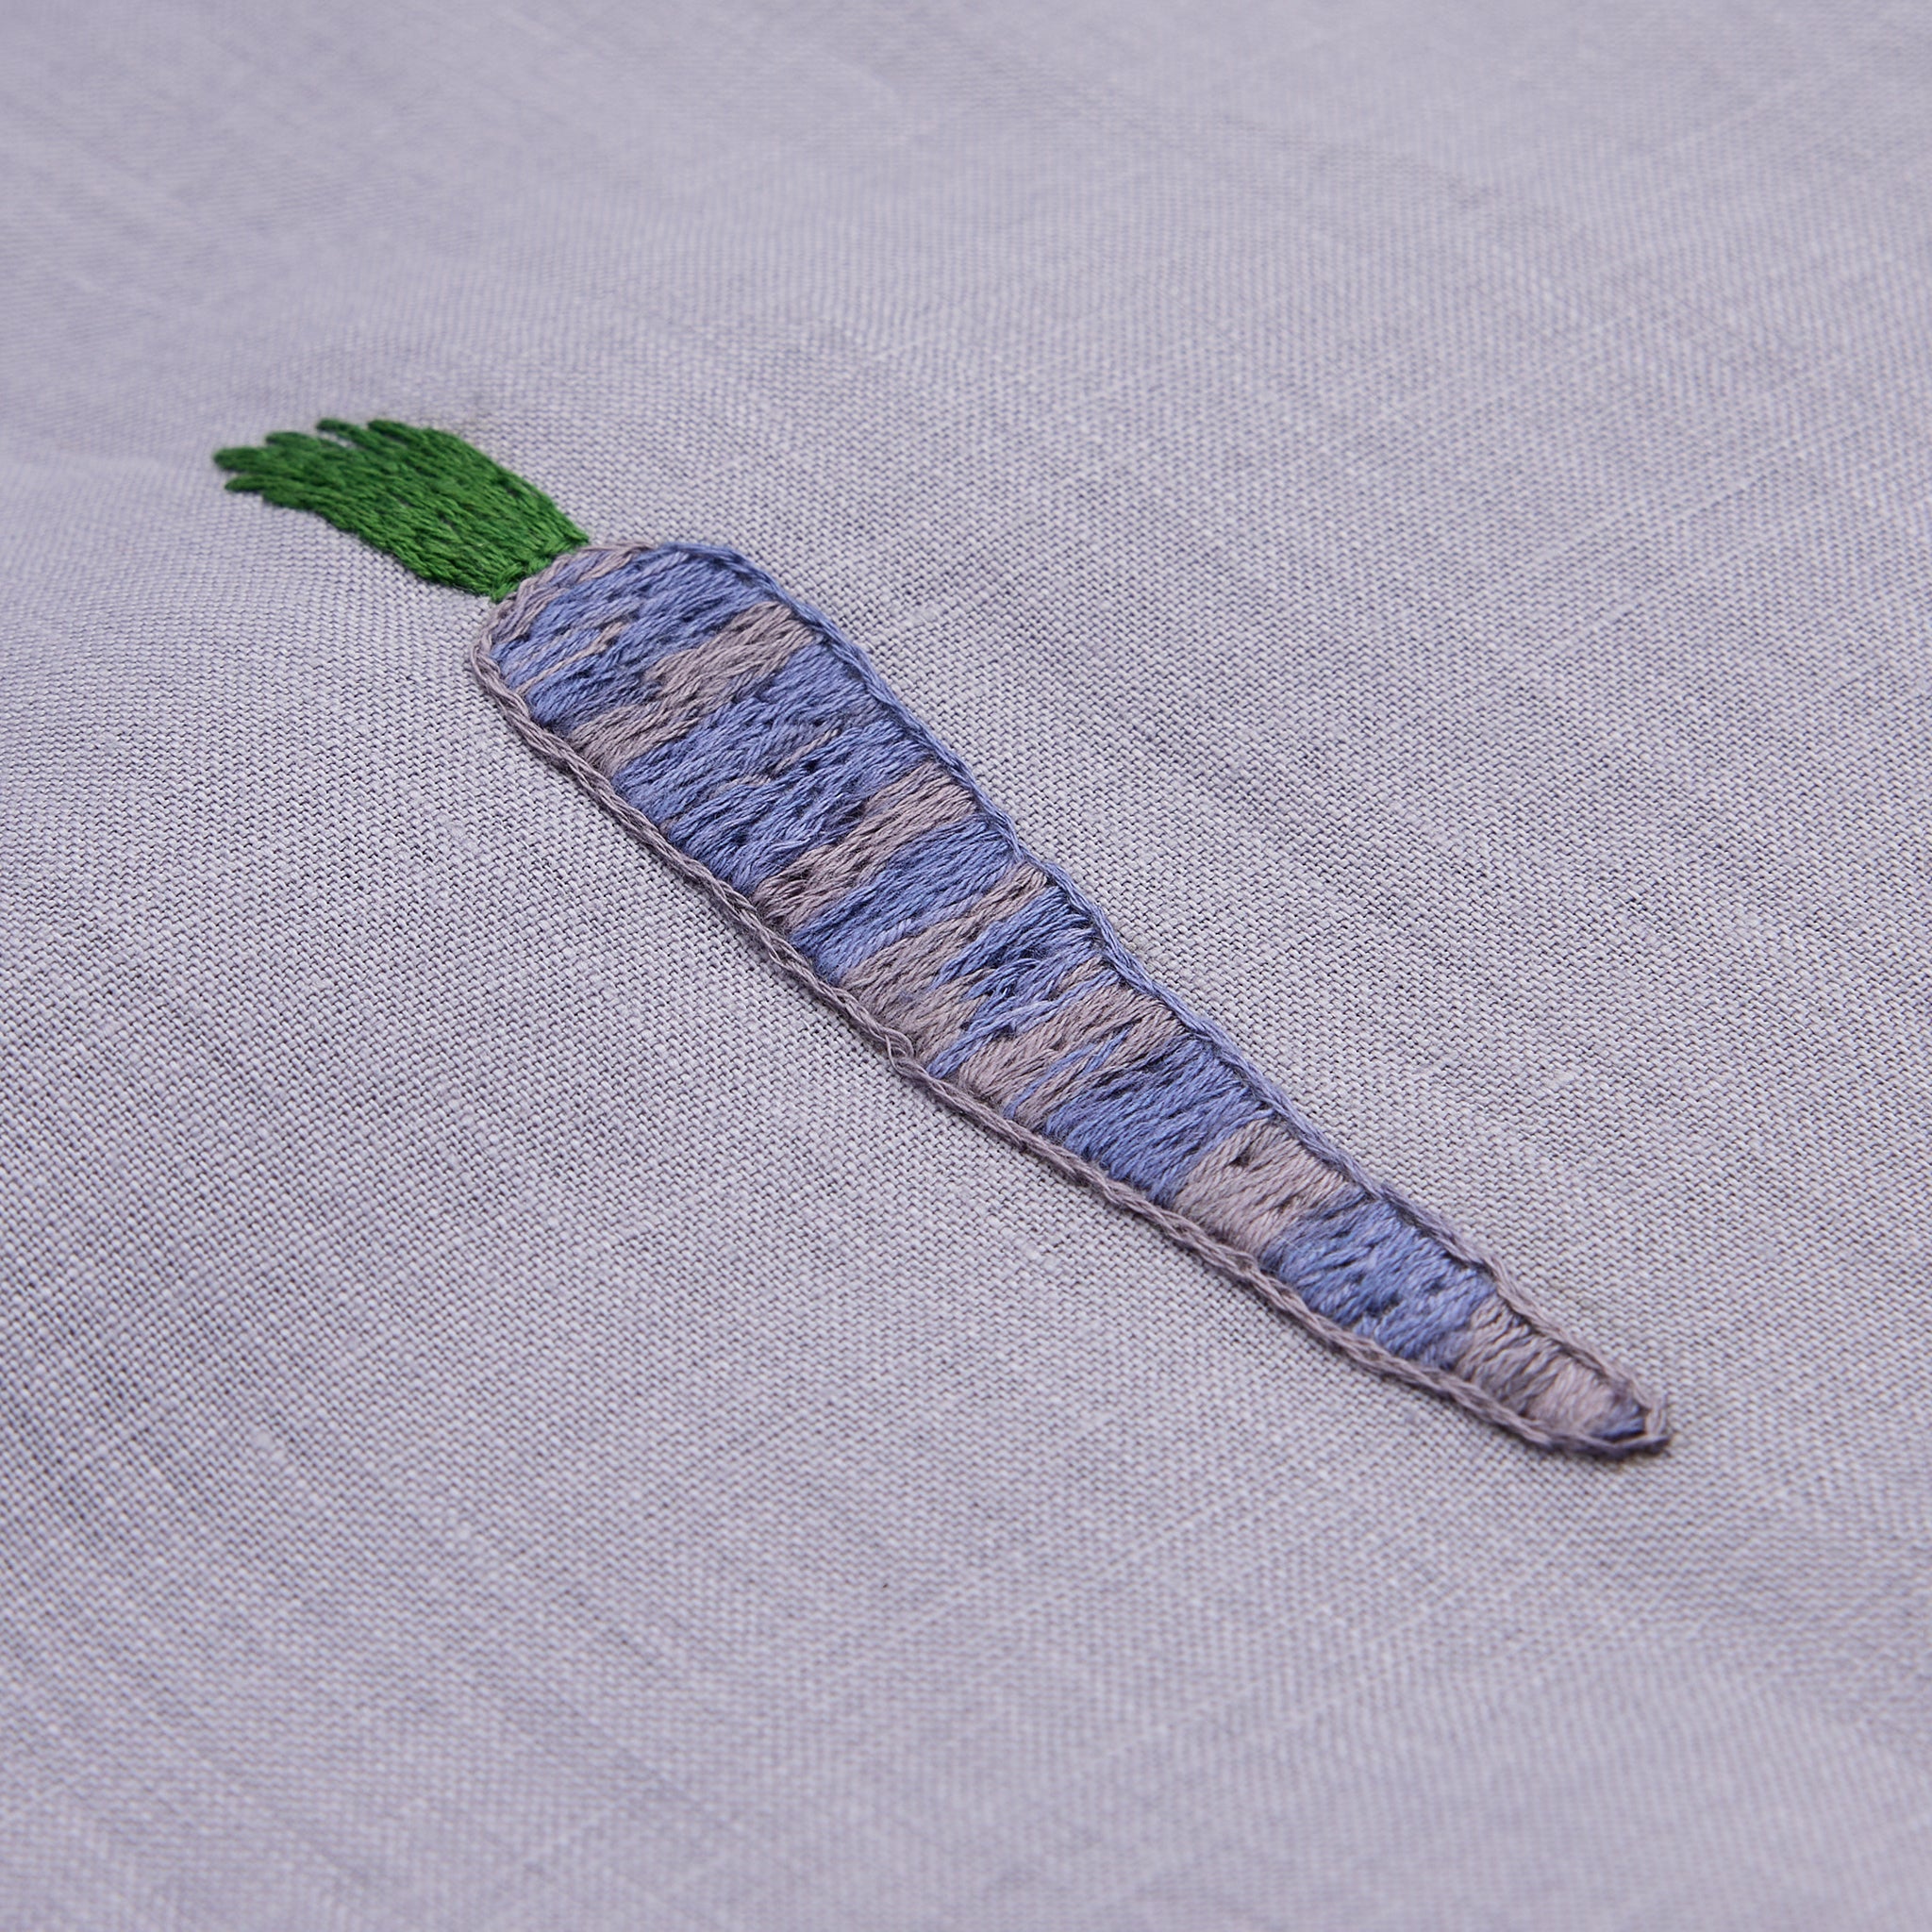 Tablecloth No. 19, hand-embroidered with heirloom carrots